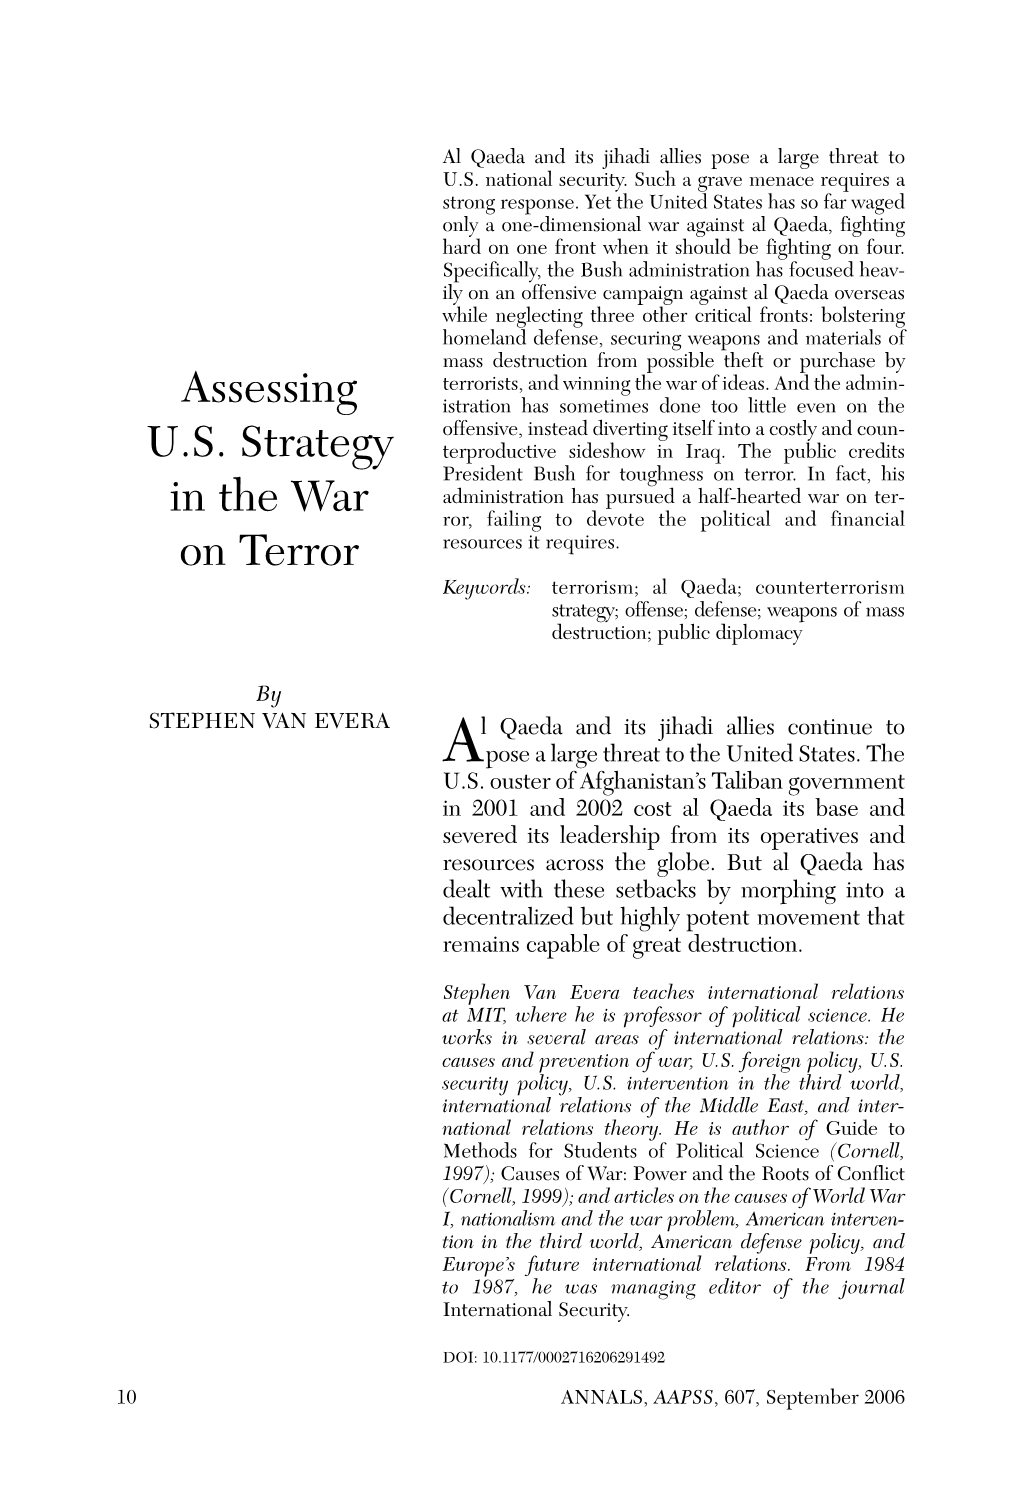 Assessing U.S. Strategy in the War on Terror 11